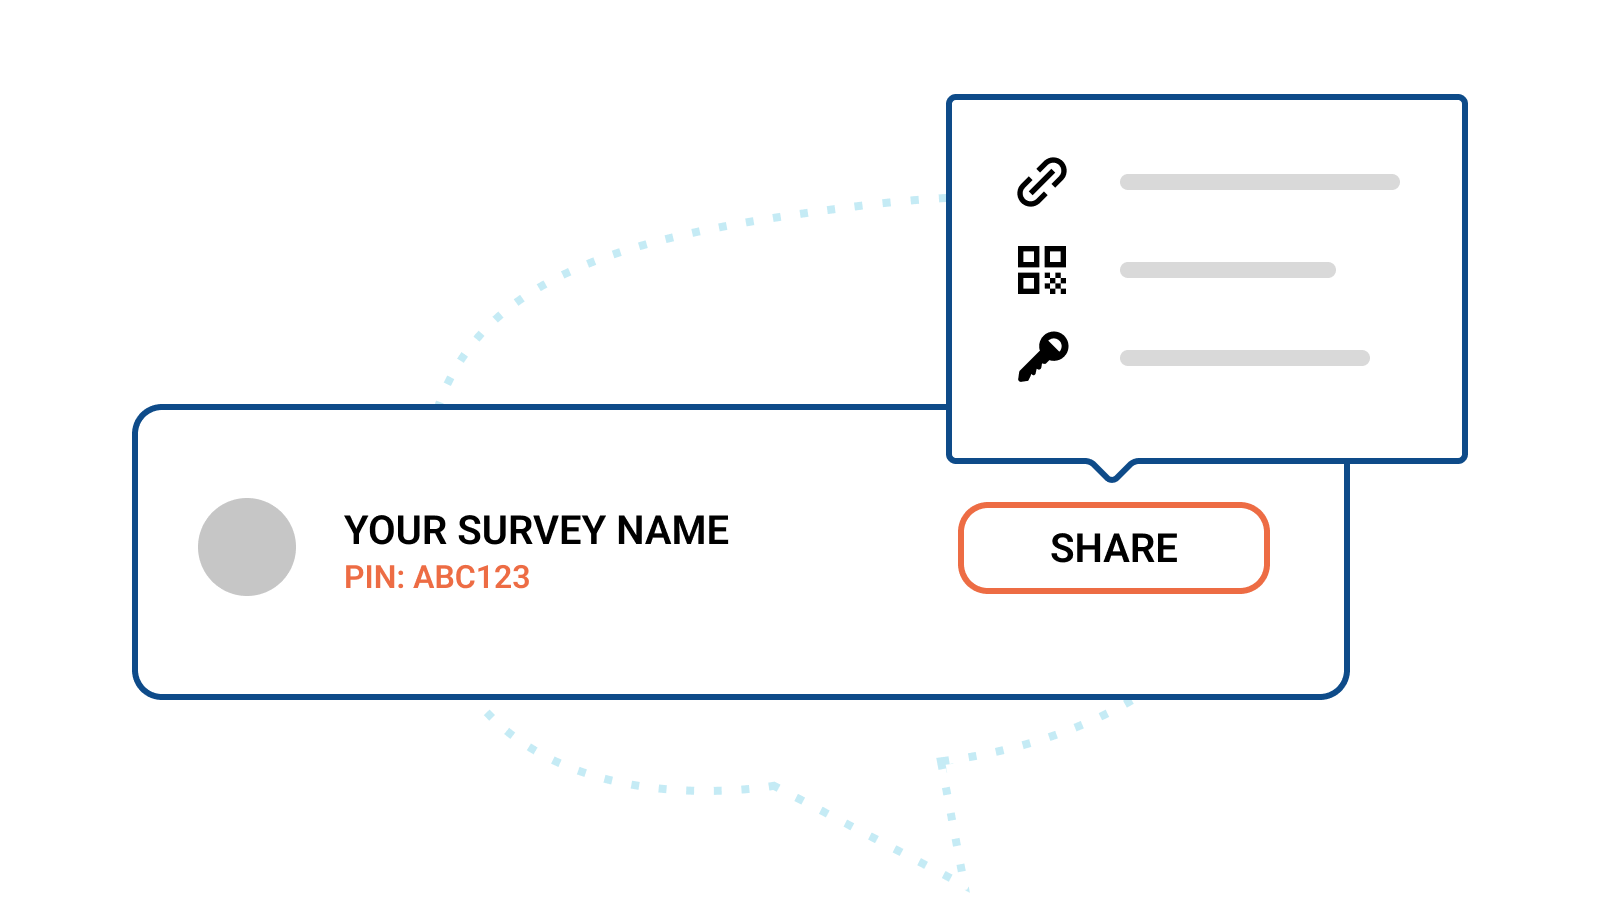 Survey list item with a share button and a share dropdown with share options